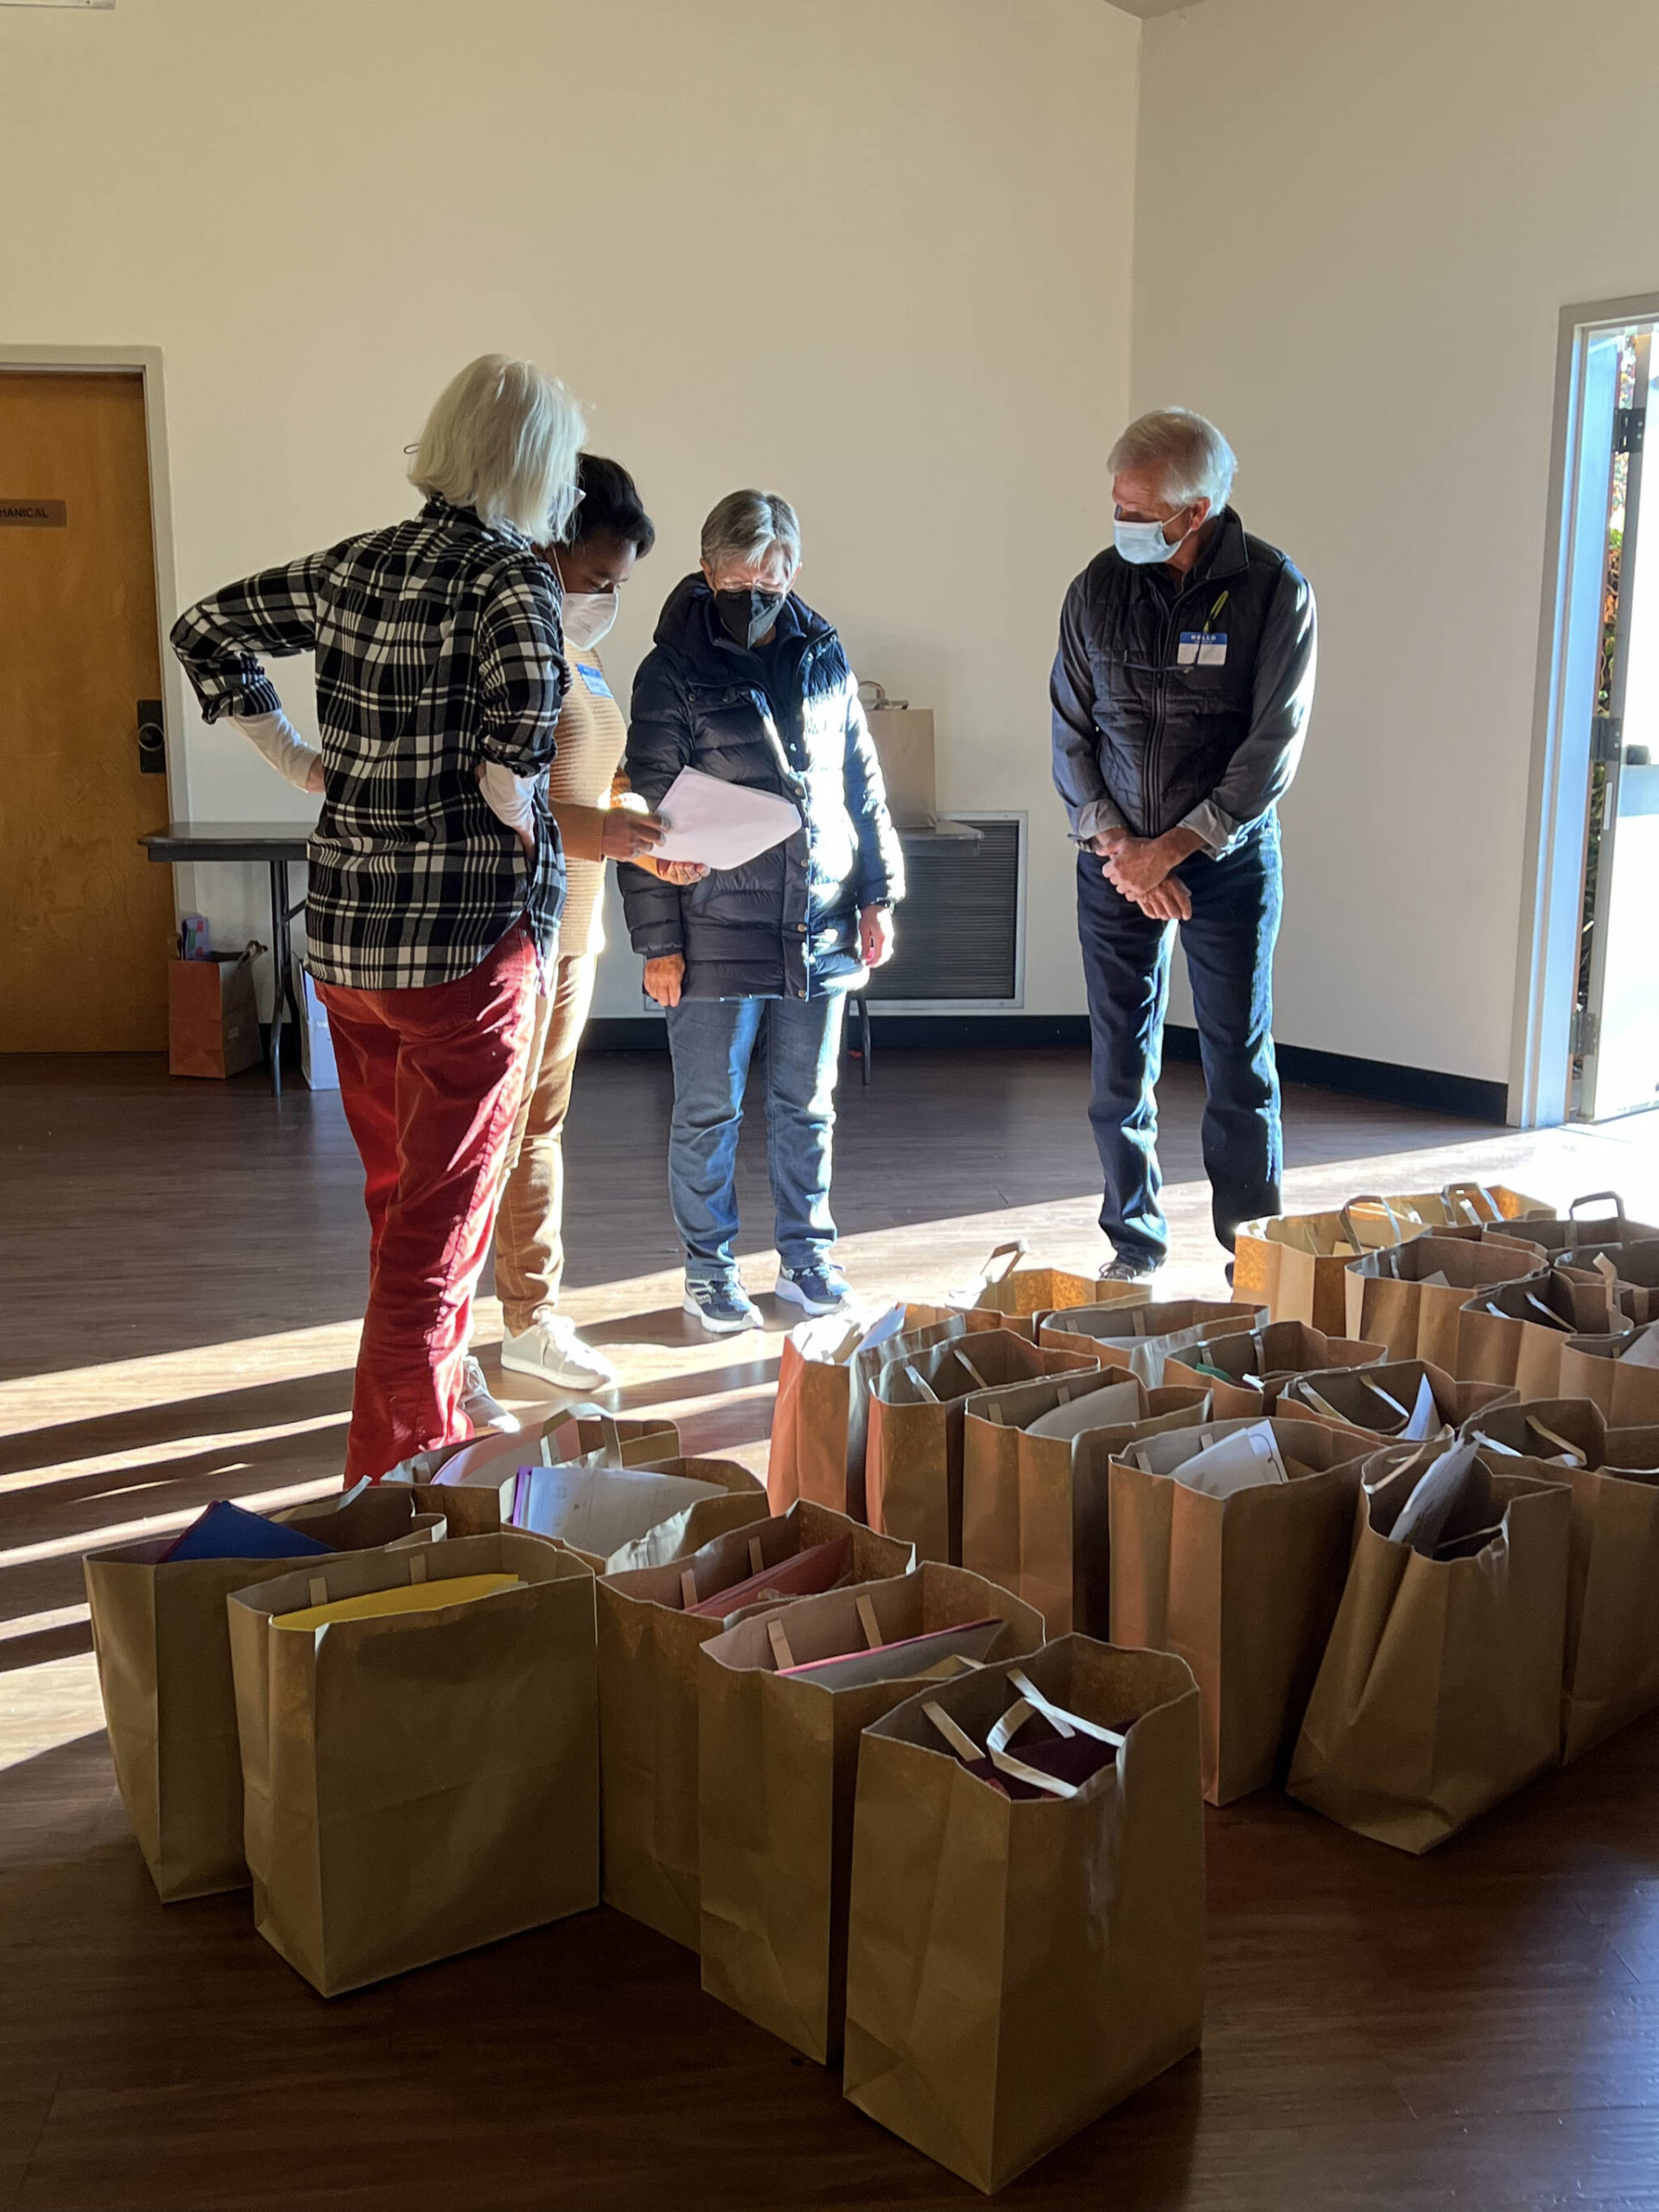 Volunteers at St. Cecilia Catholic Church collect and deliver meals for residents who were not able to cook a Thanksgiving meal or attend a gathering.